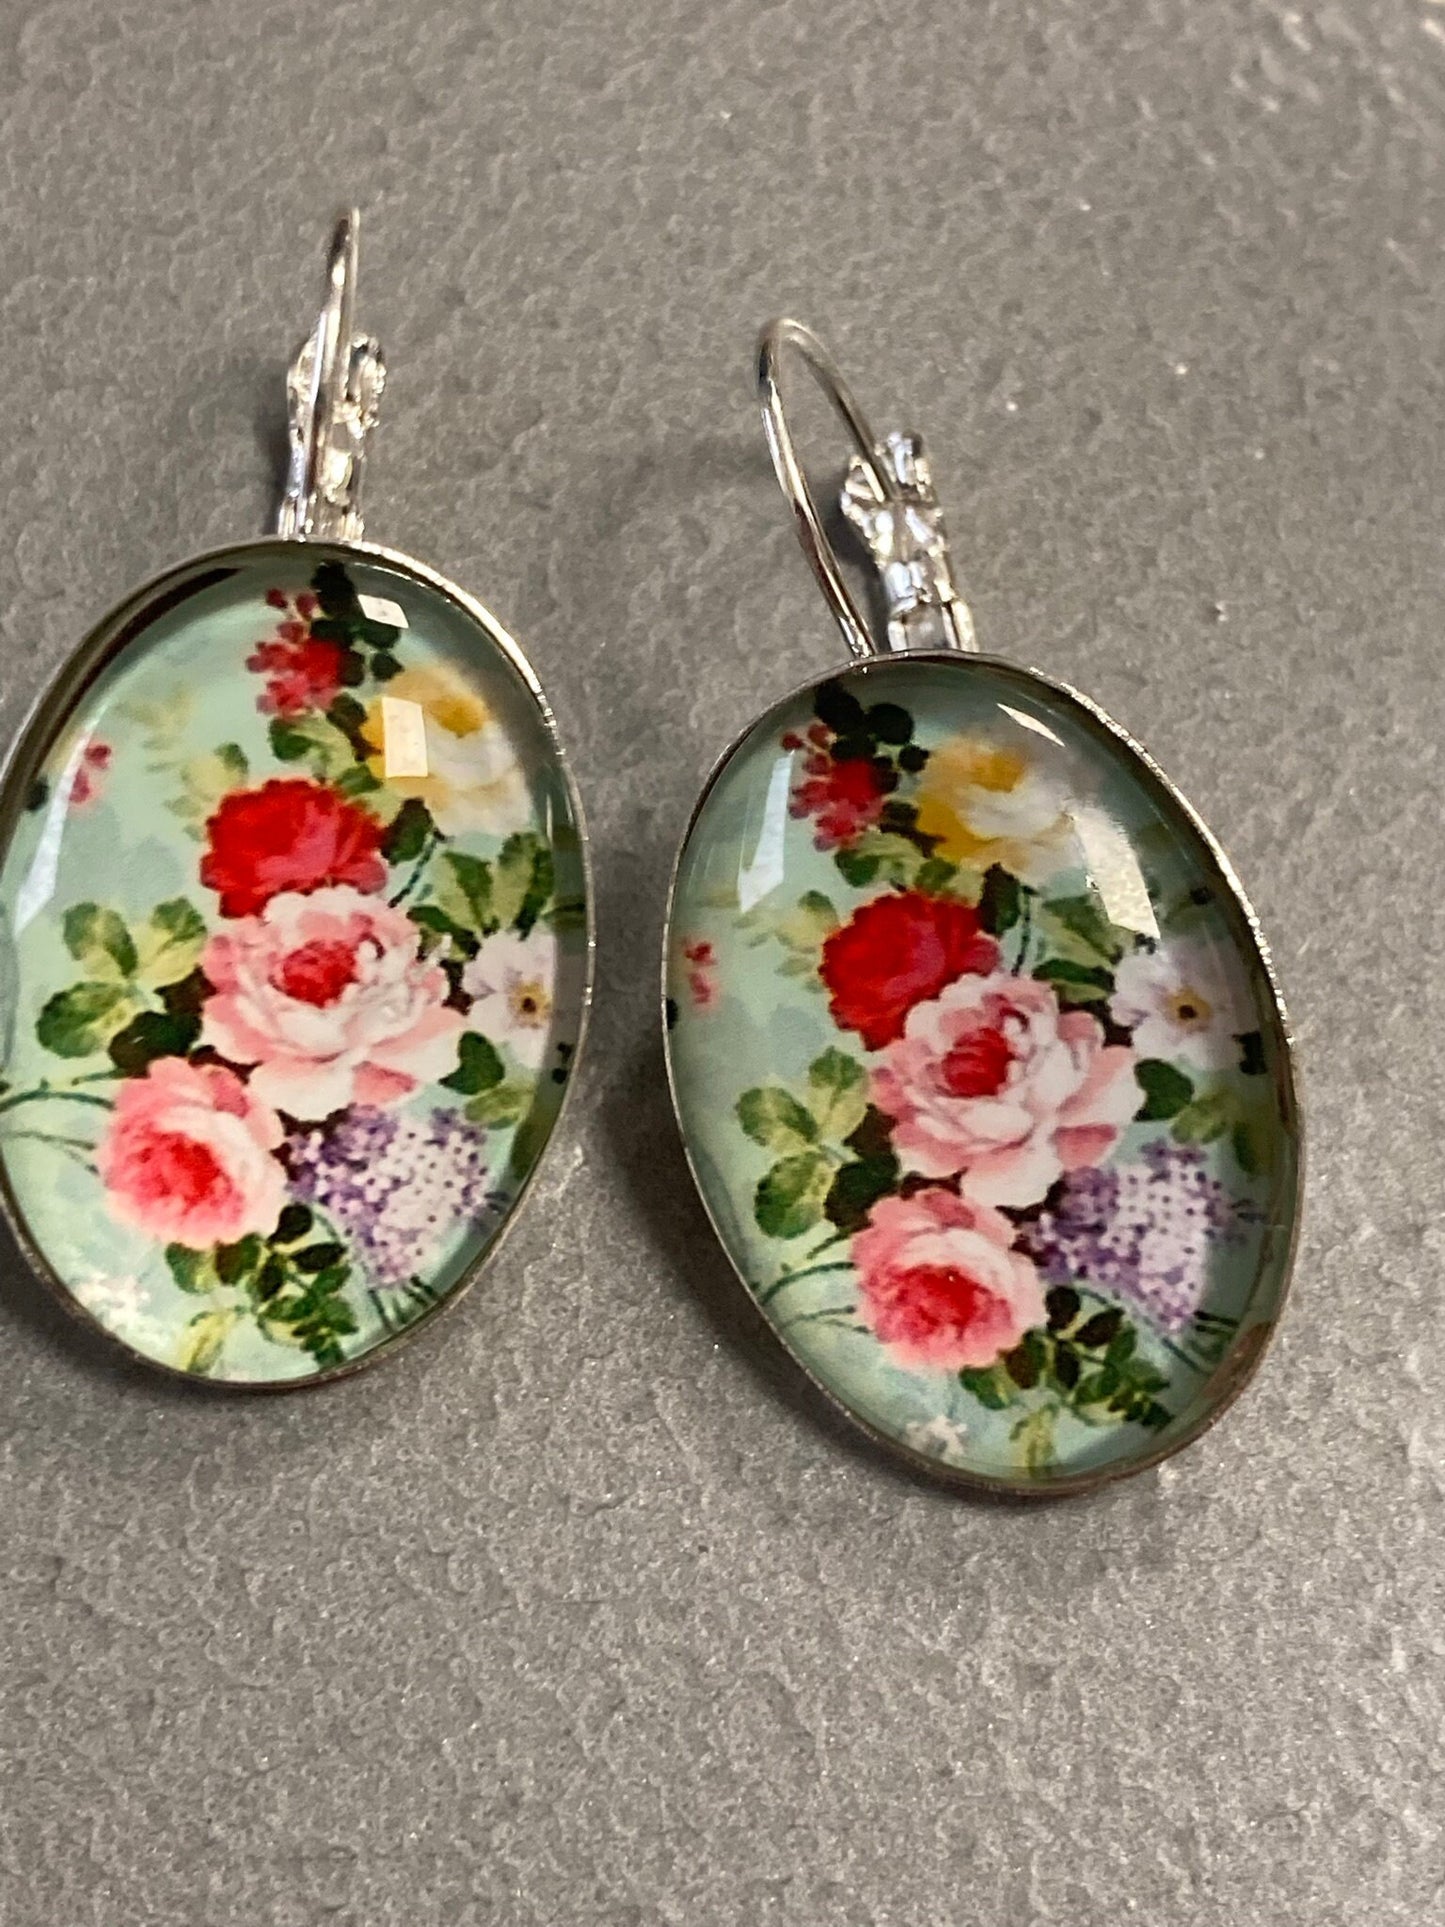 Red Pink roses Spring garden flowers oval glass cabochon floral earrings